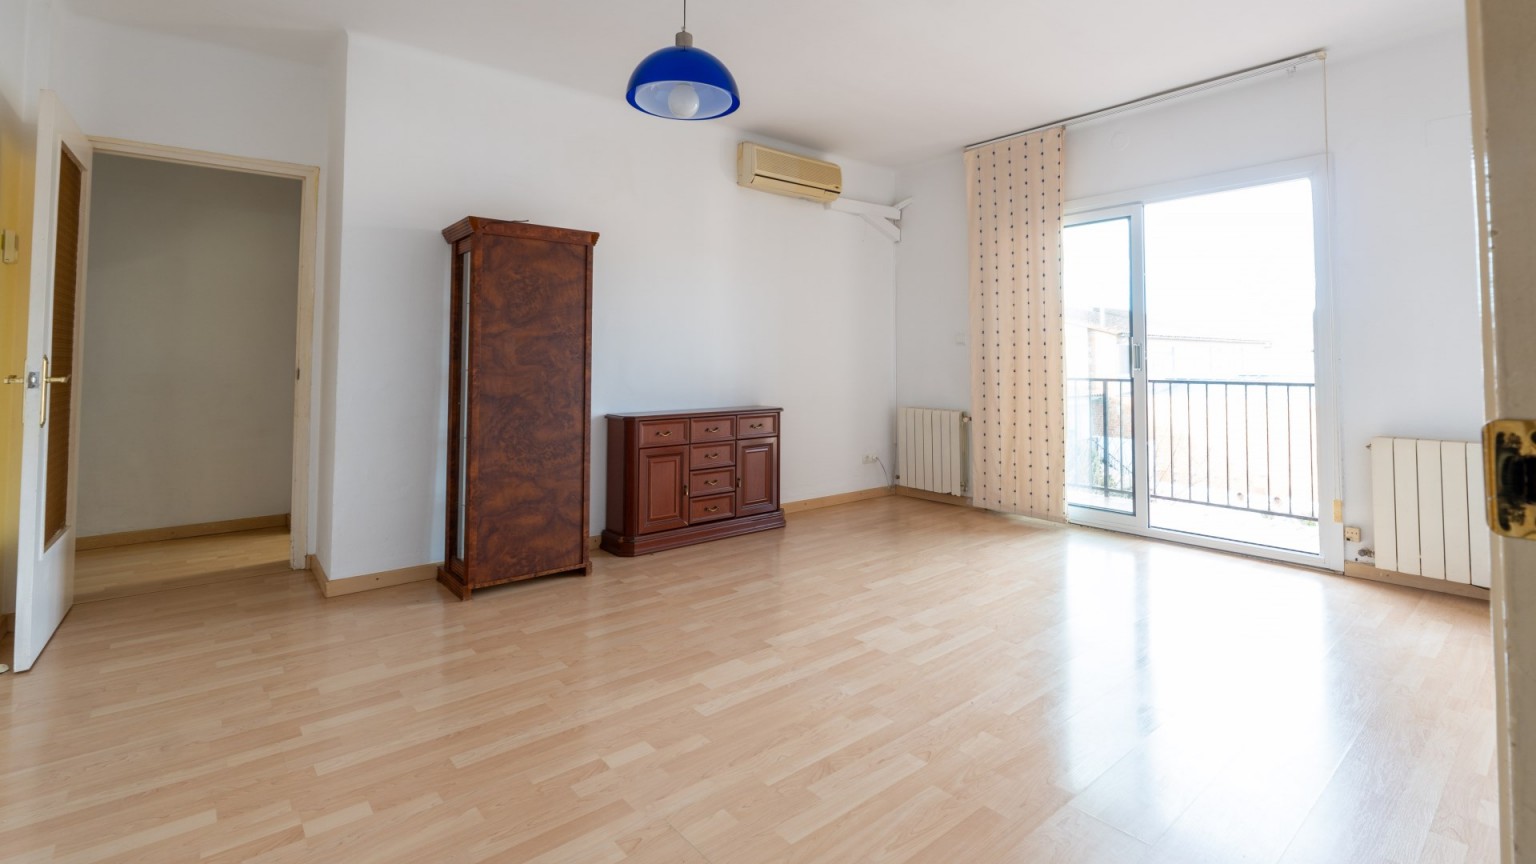 Flat for sale located in a very quiet area in the center of the town of Sant Gregori